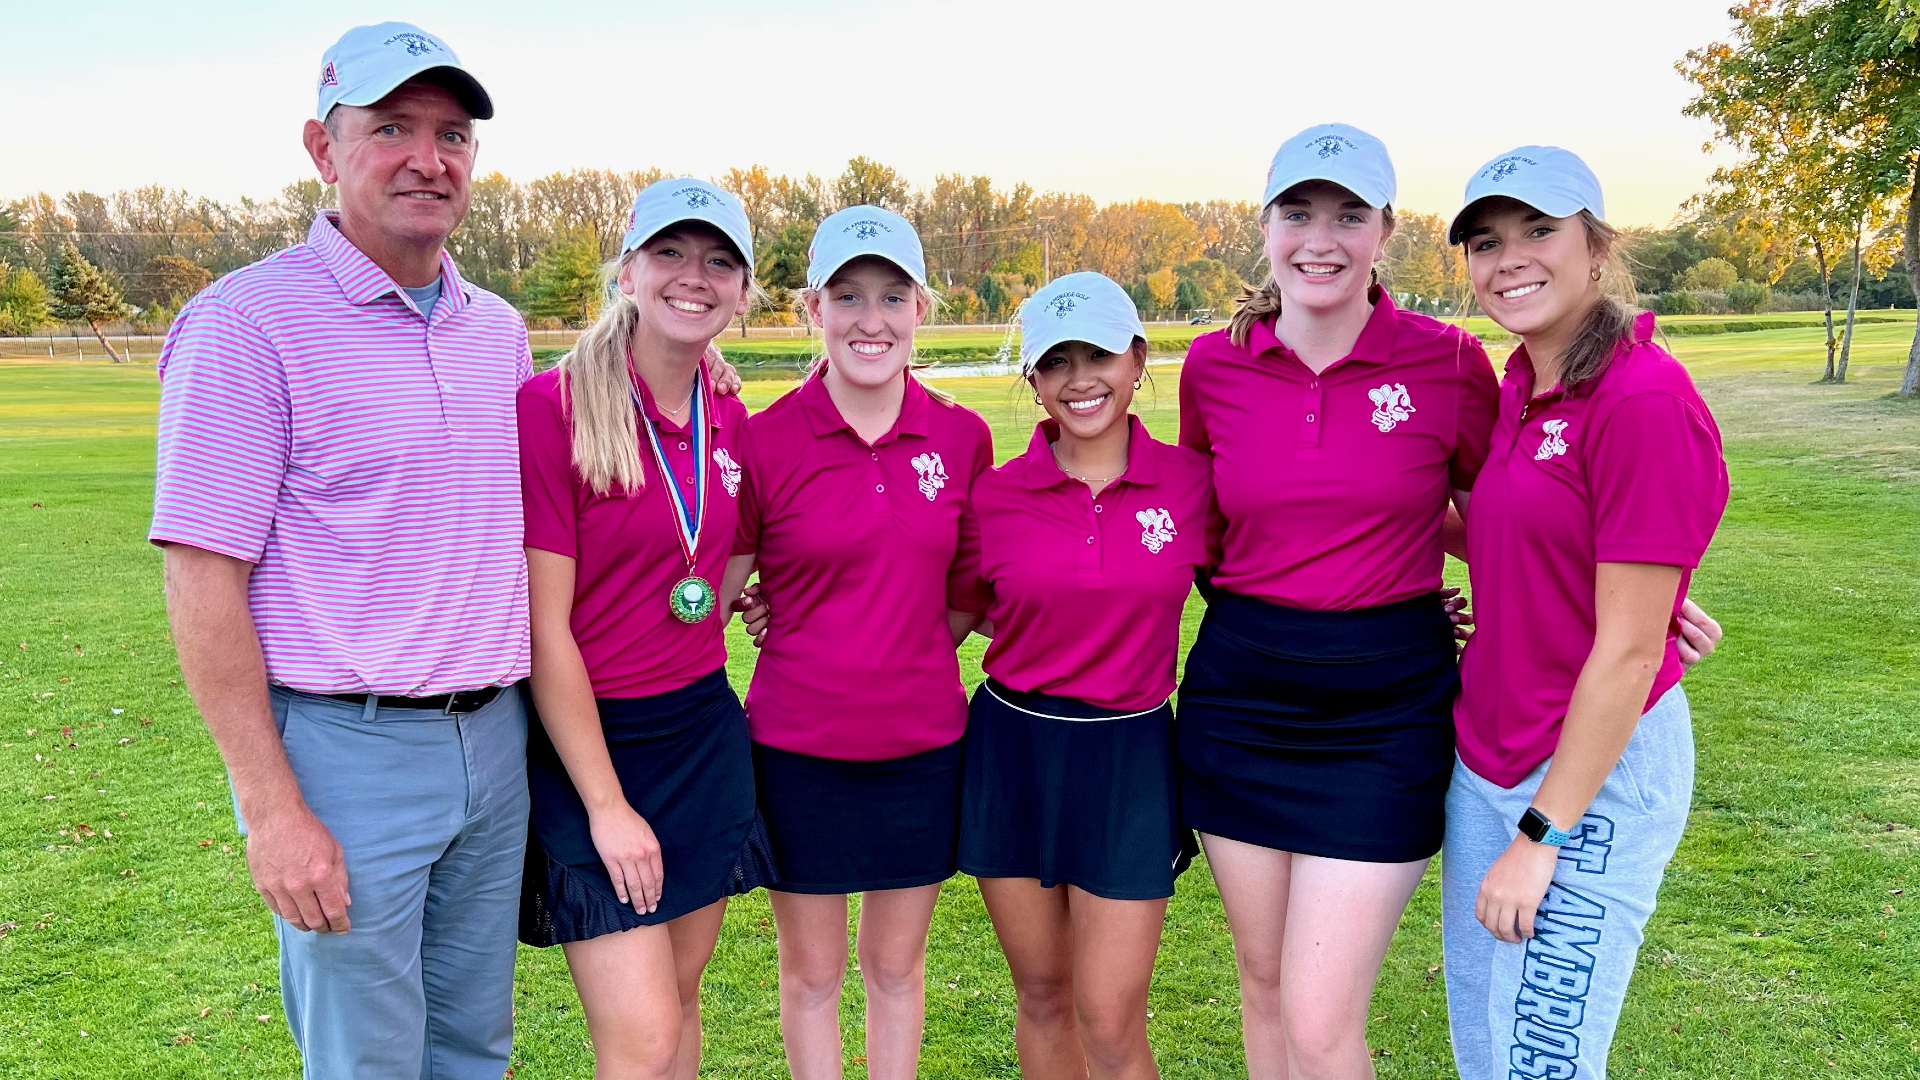 Lytle wins medalist honors as St. Ambrose takes second at CCAC Cup